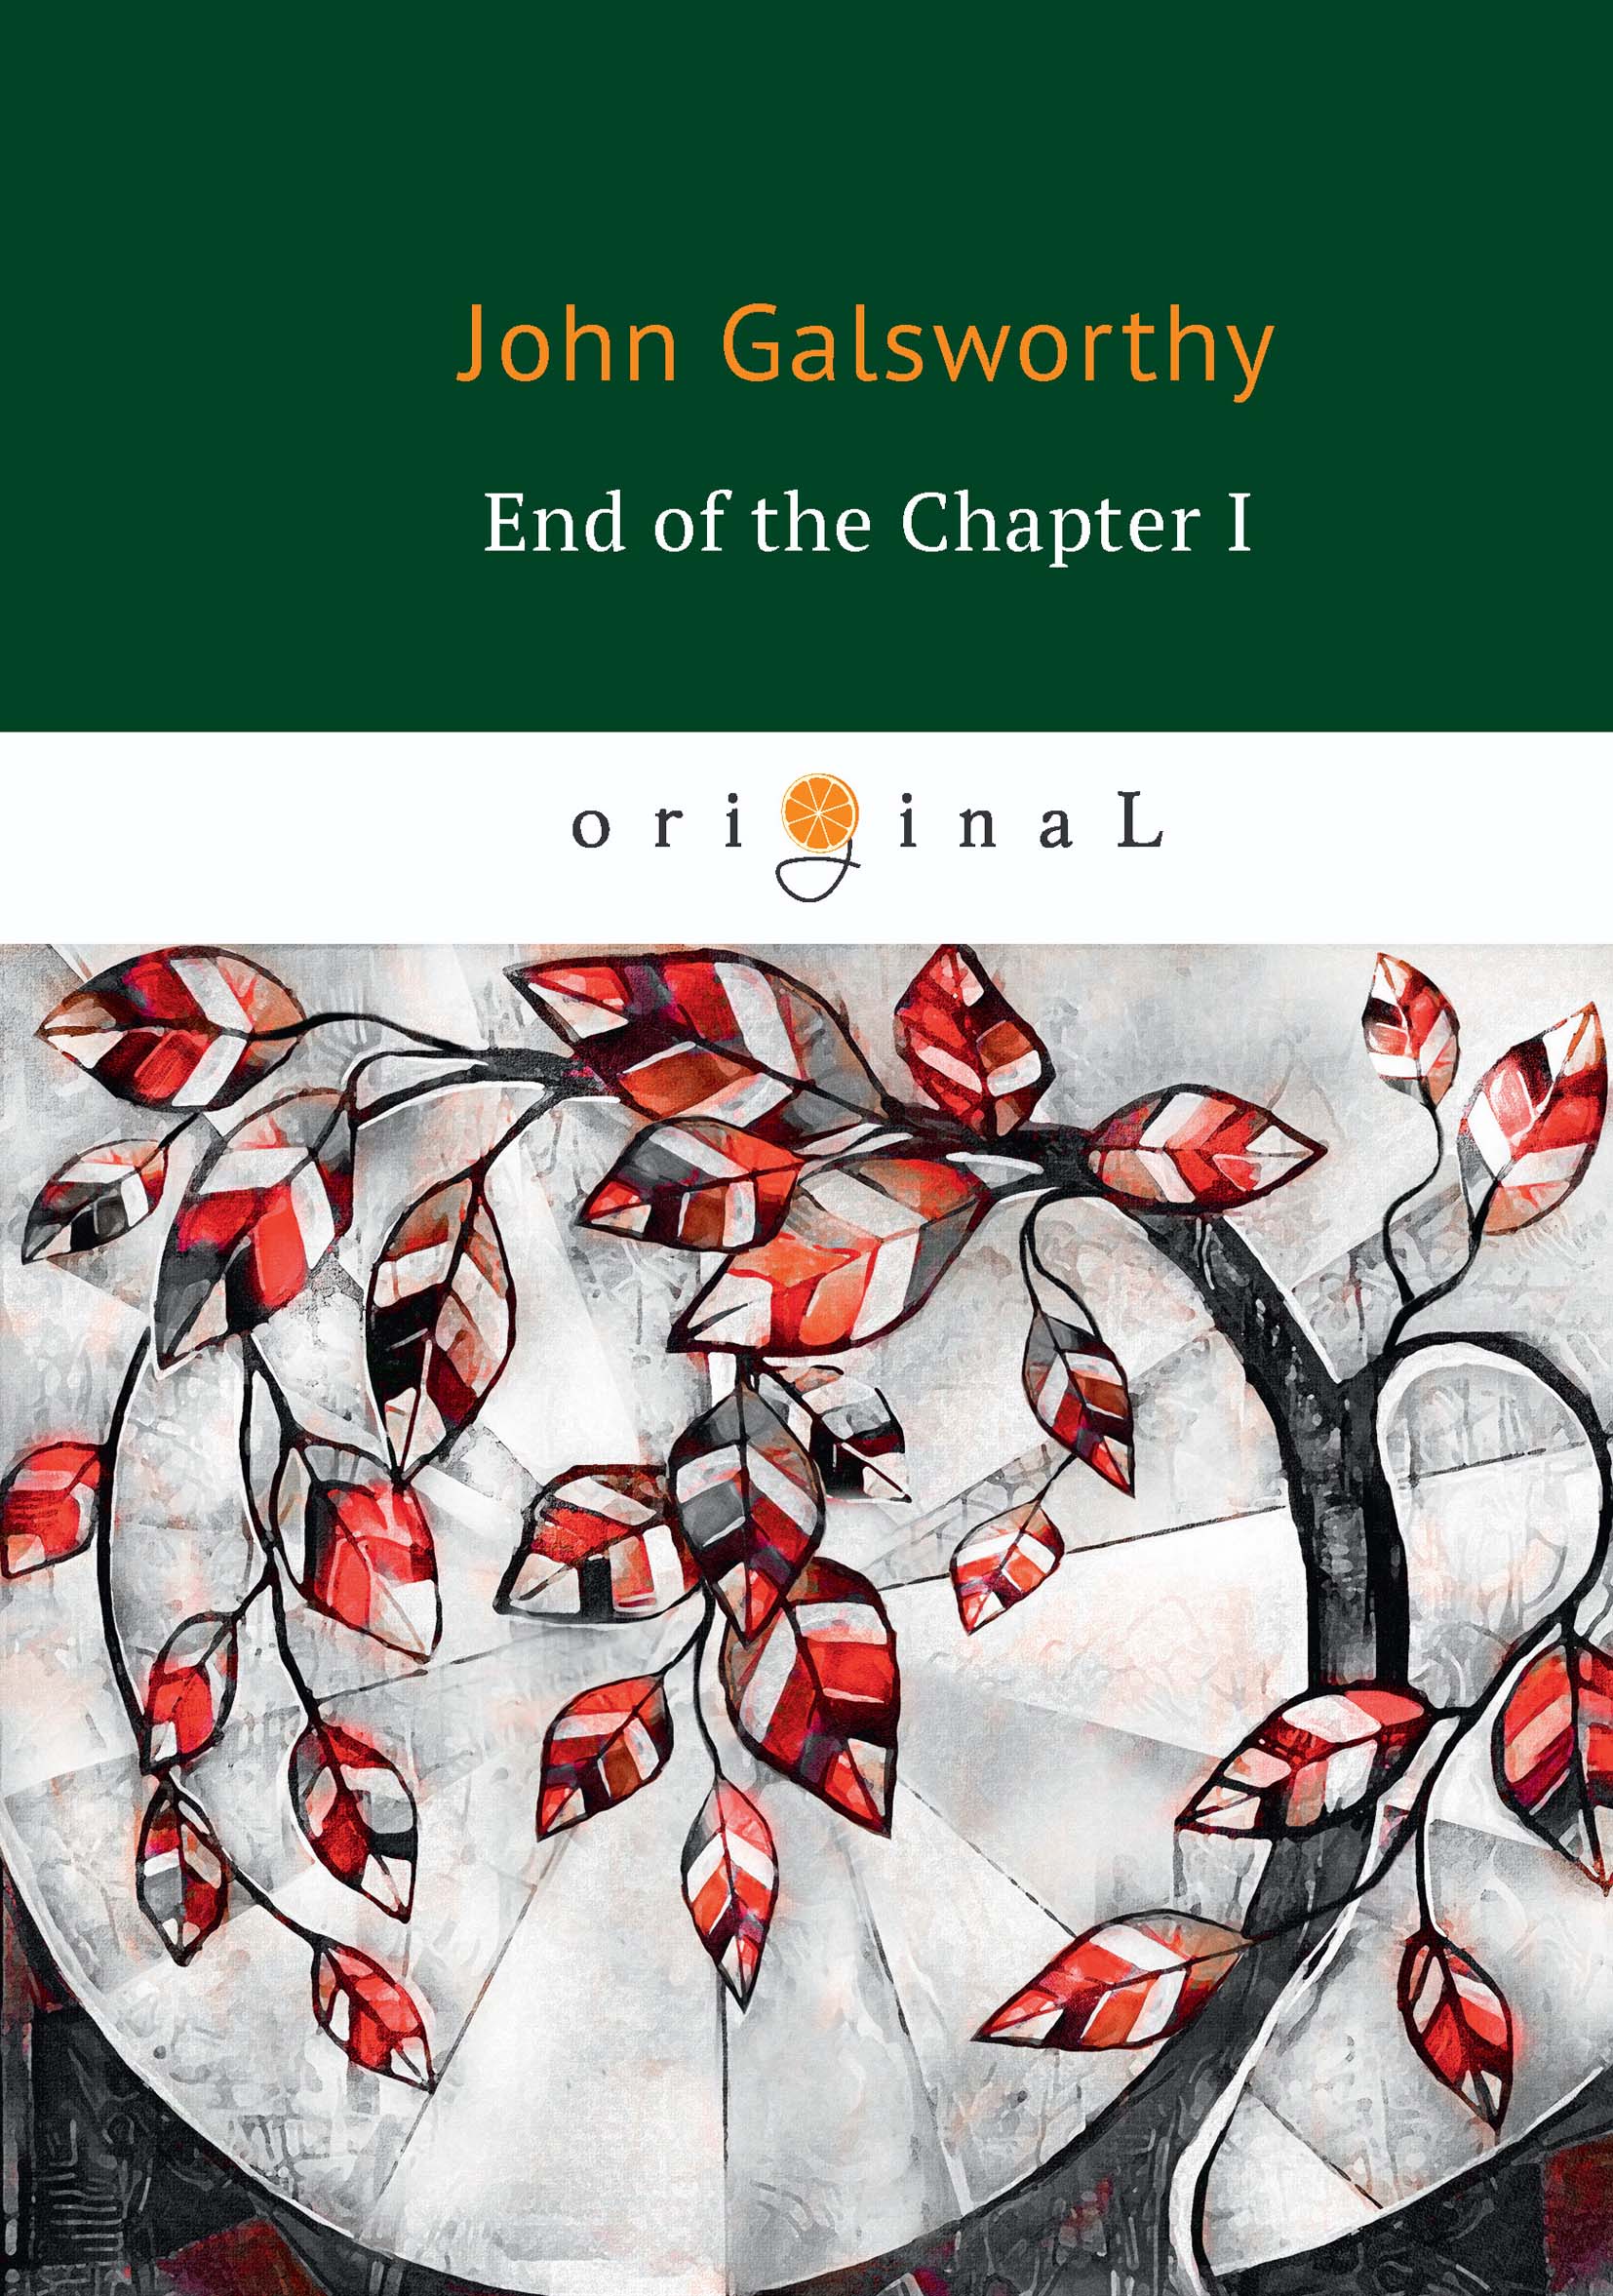 End of the Chapter I